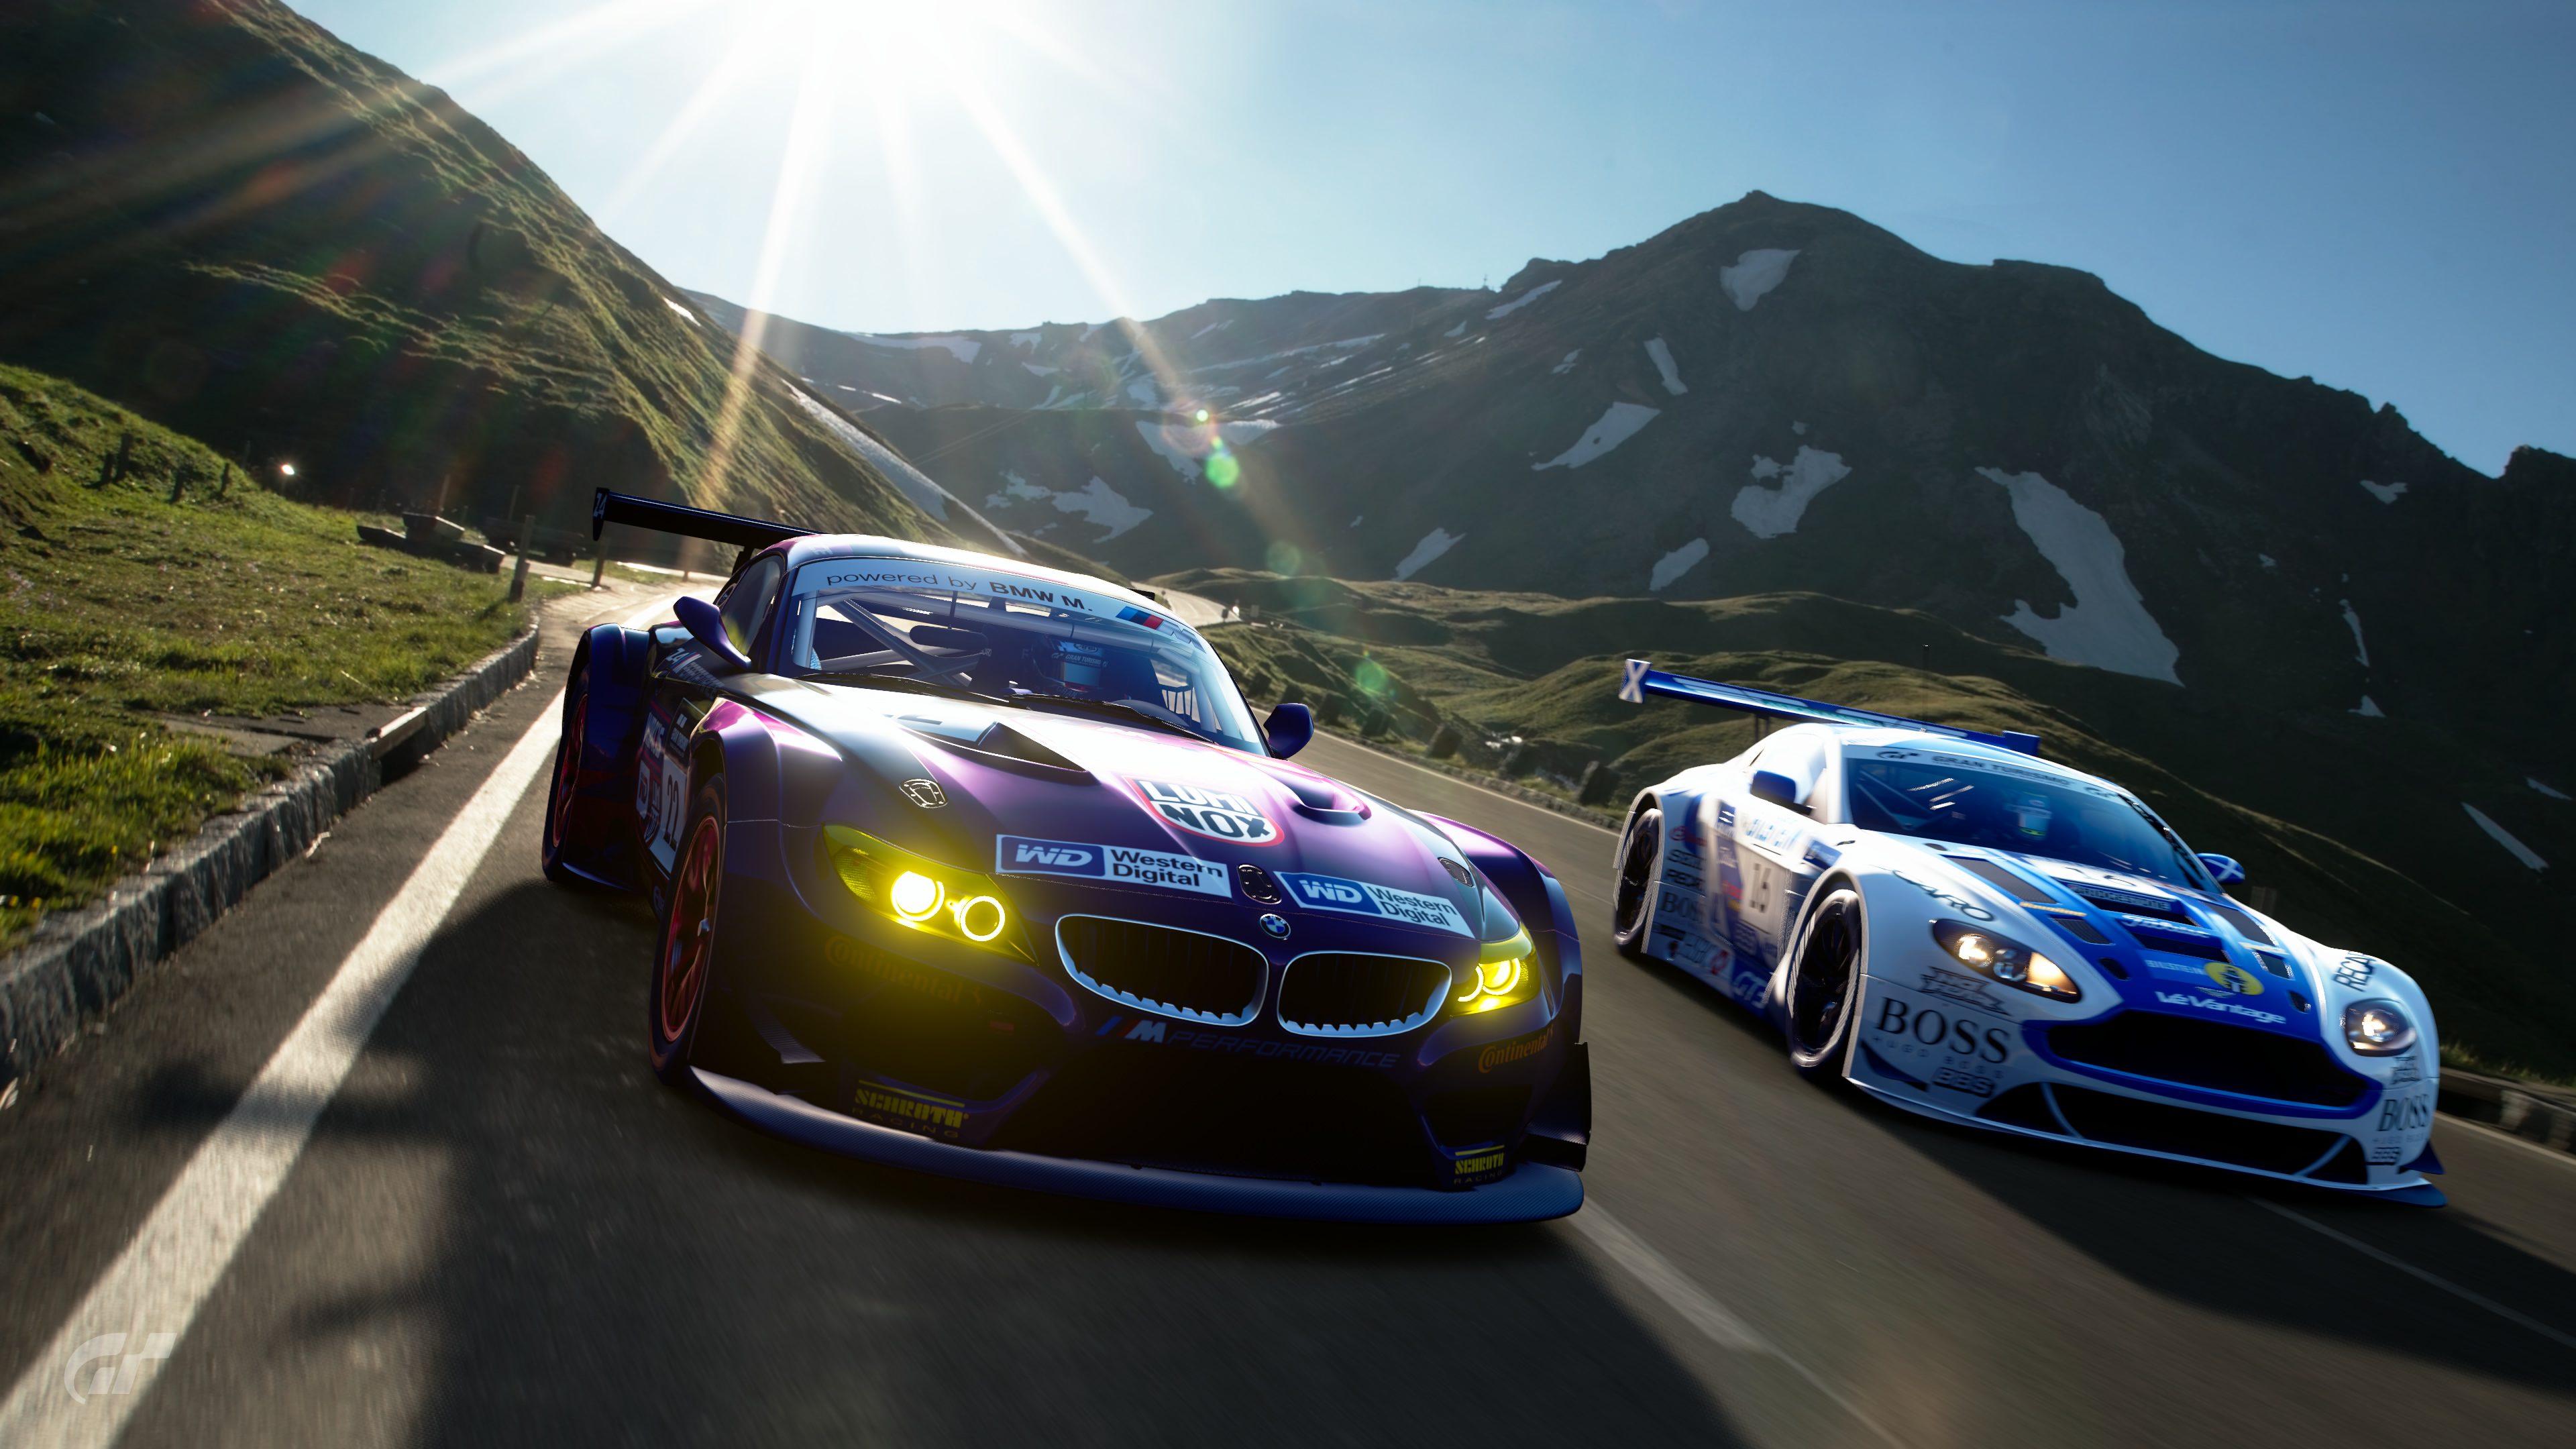 Z4 and V12